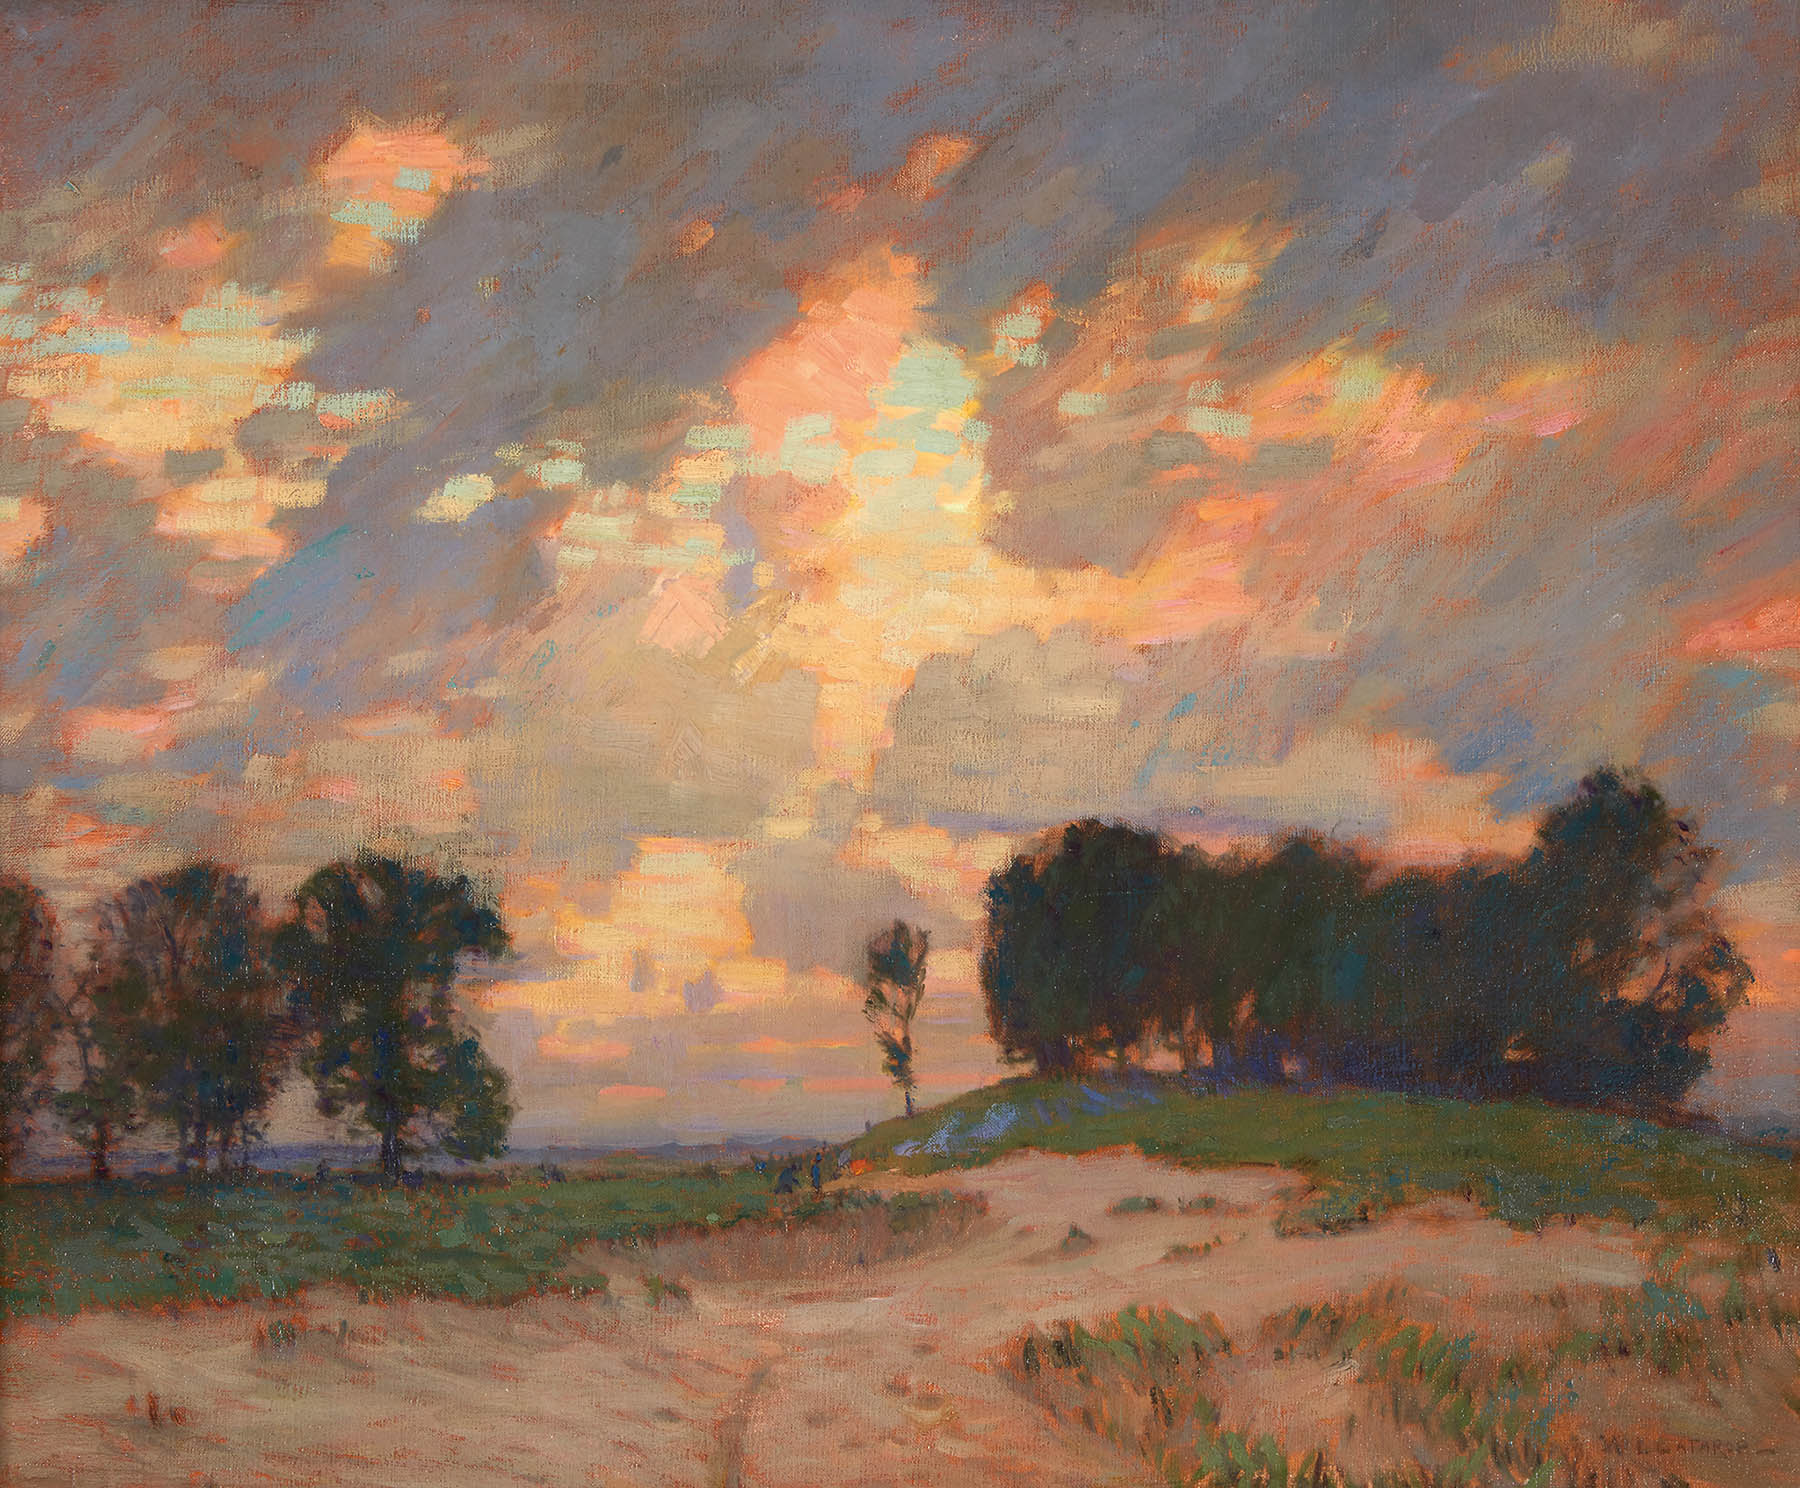 Lot 39 | William Langson Lathrop (American, 1859-1938), The Bonfire, oil on canvas-SOLD FOR $112,500